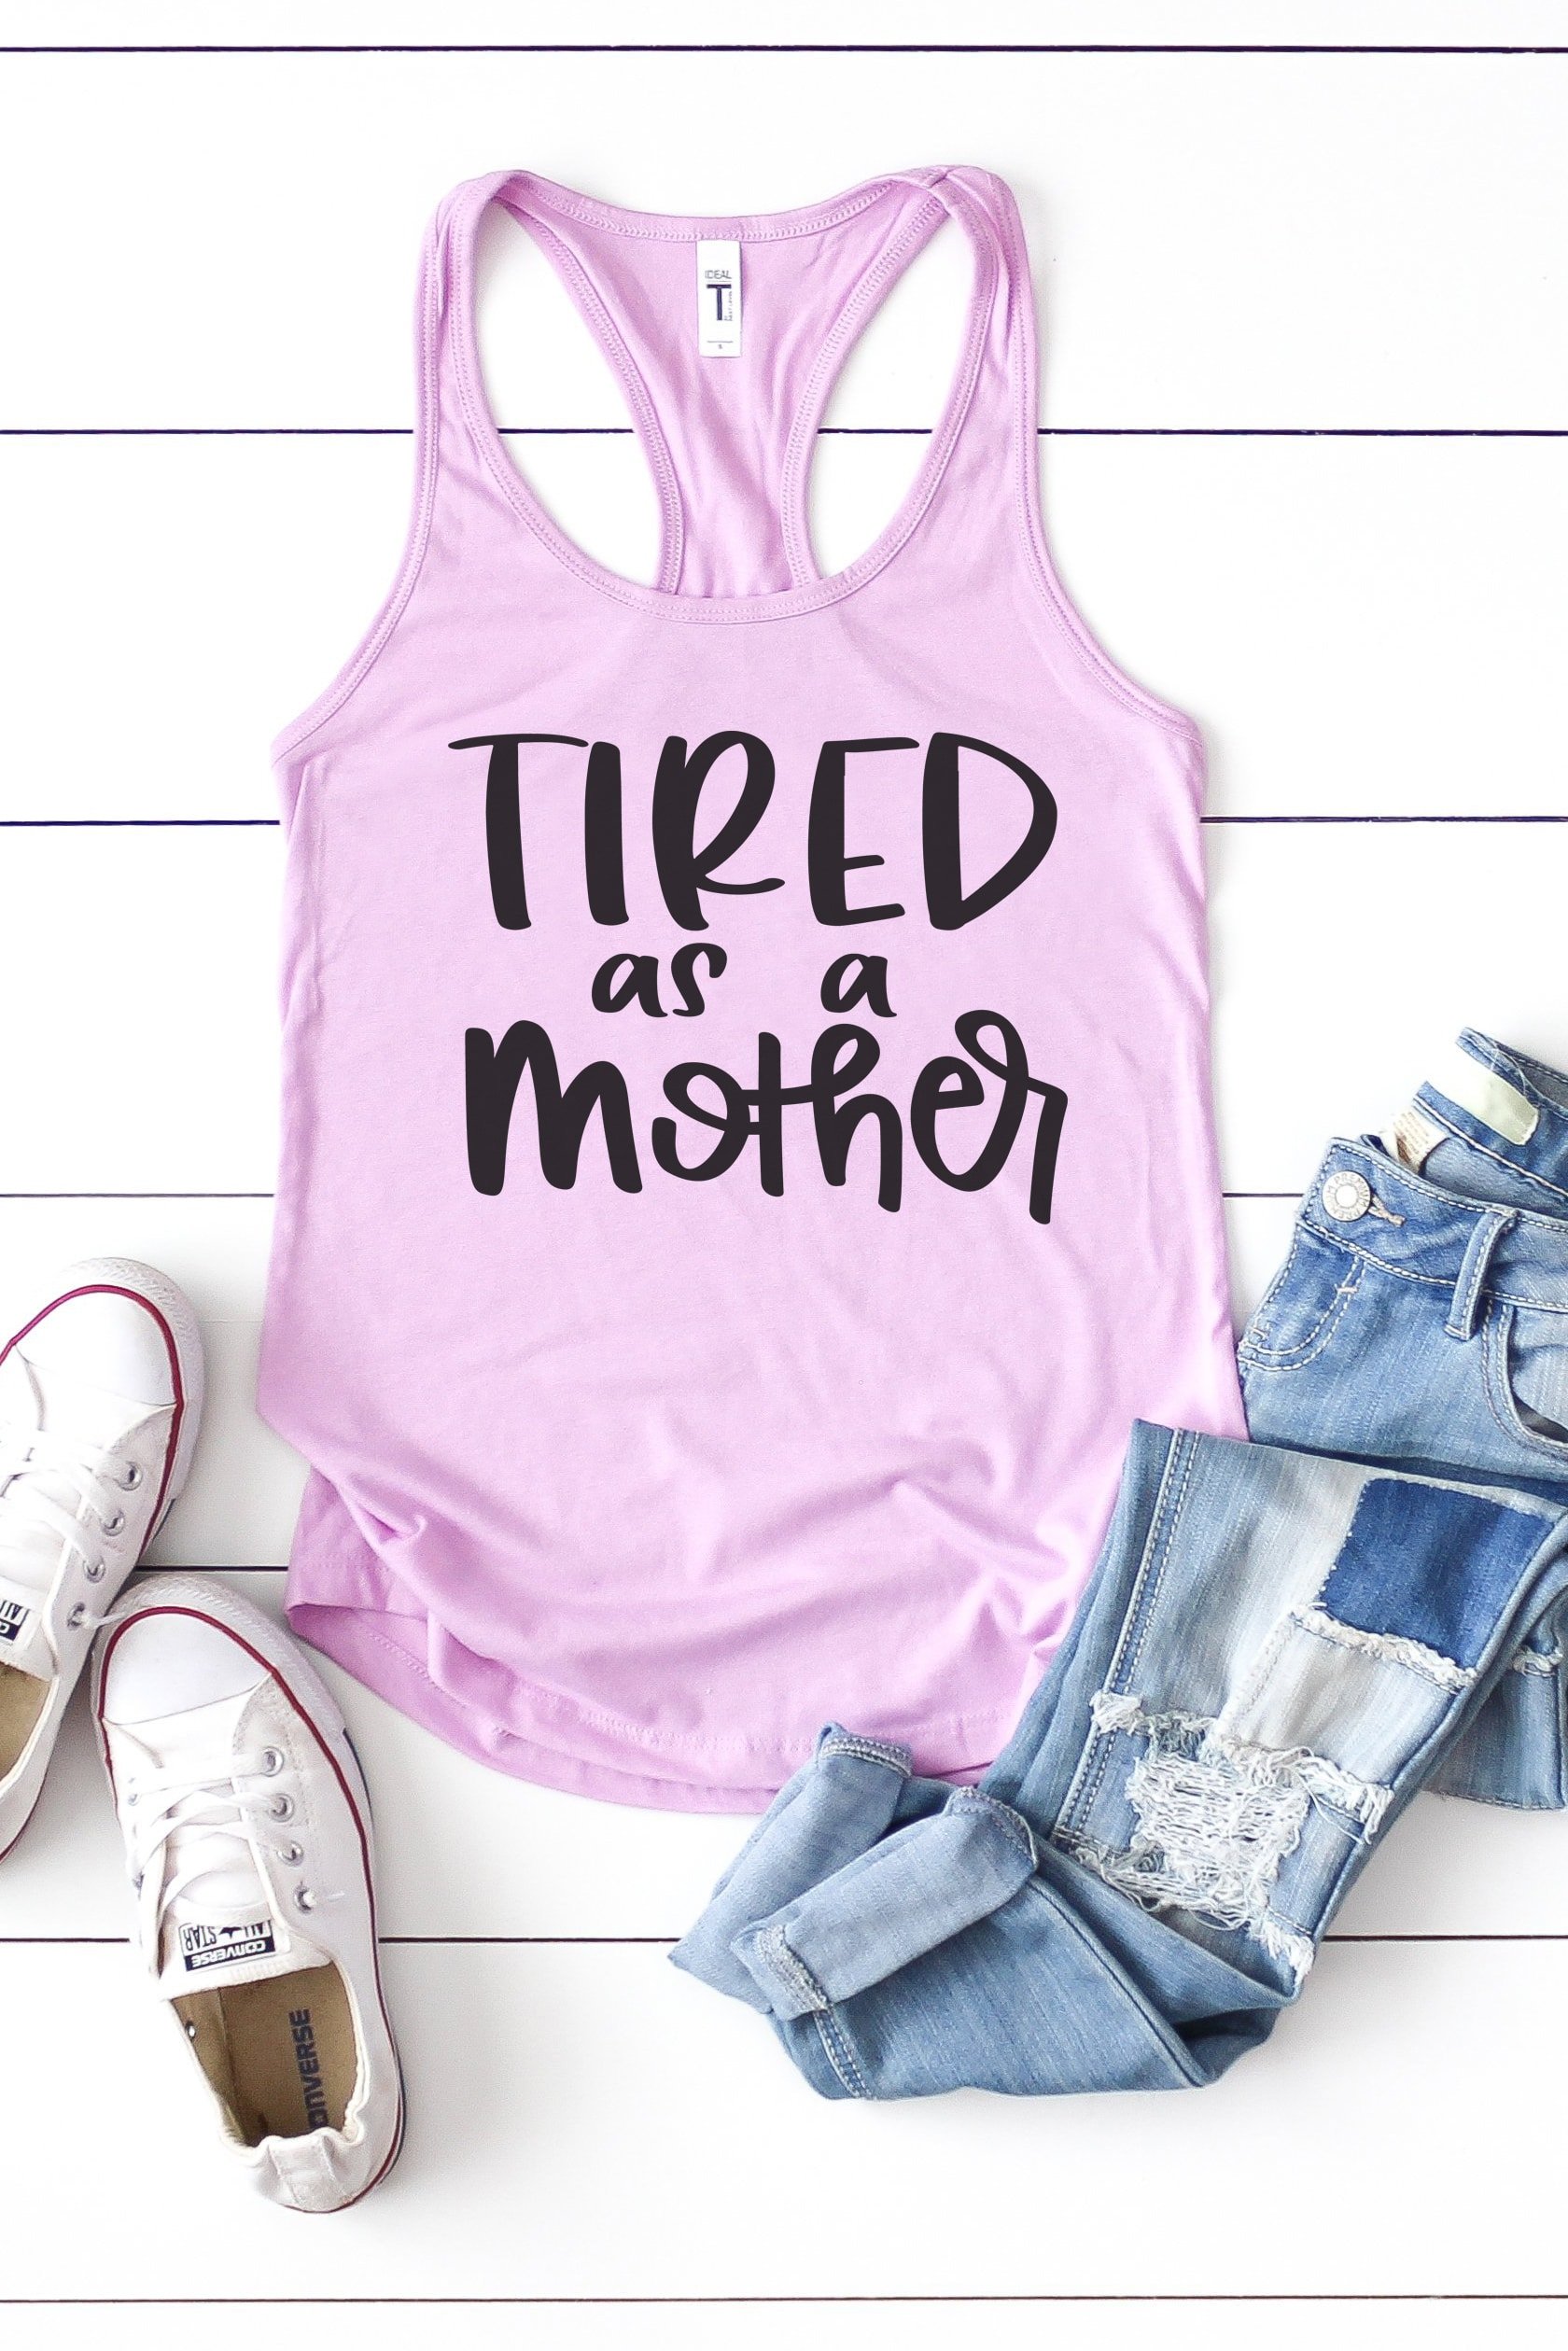 tired as a mother svg file on shirt with accessories